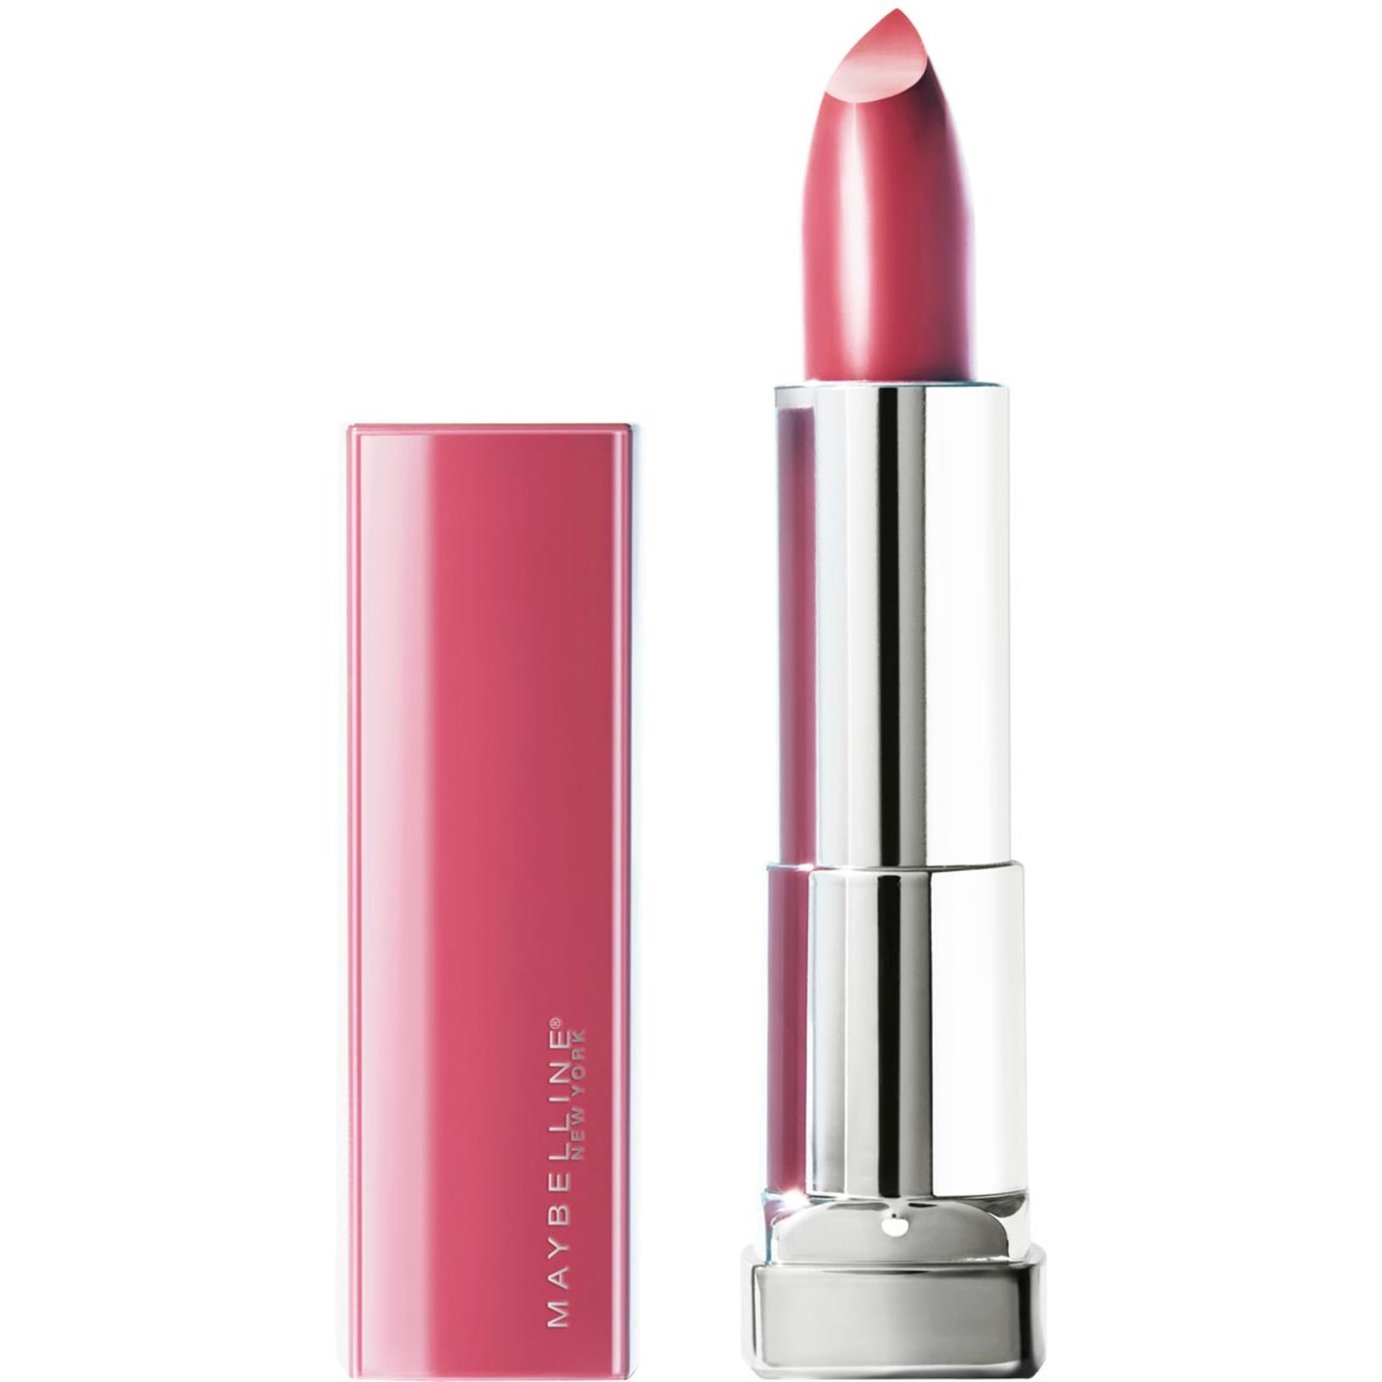 Maybelline Made for All Lipstick - Pink for Me